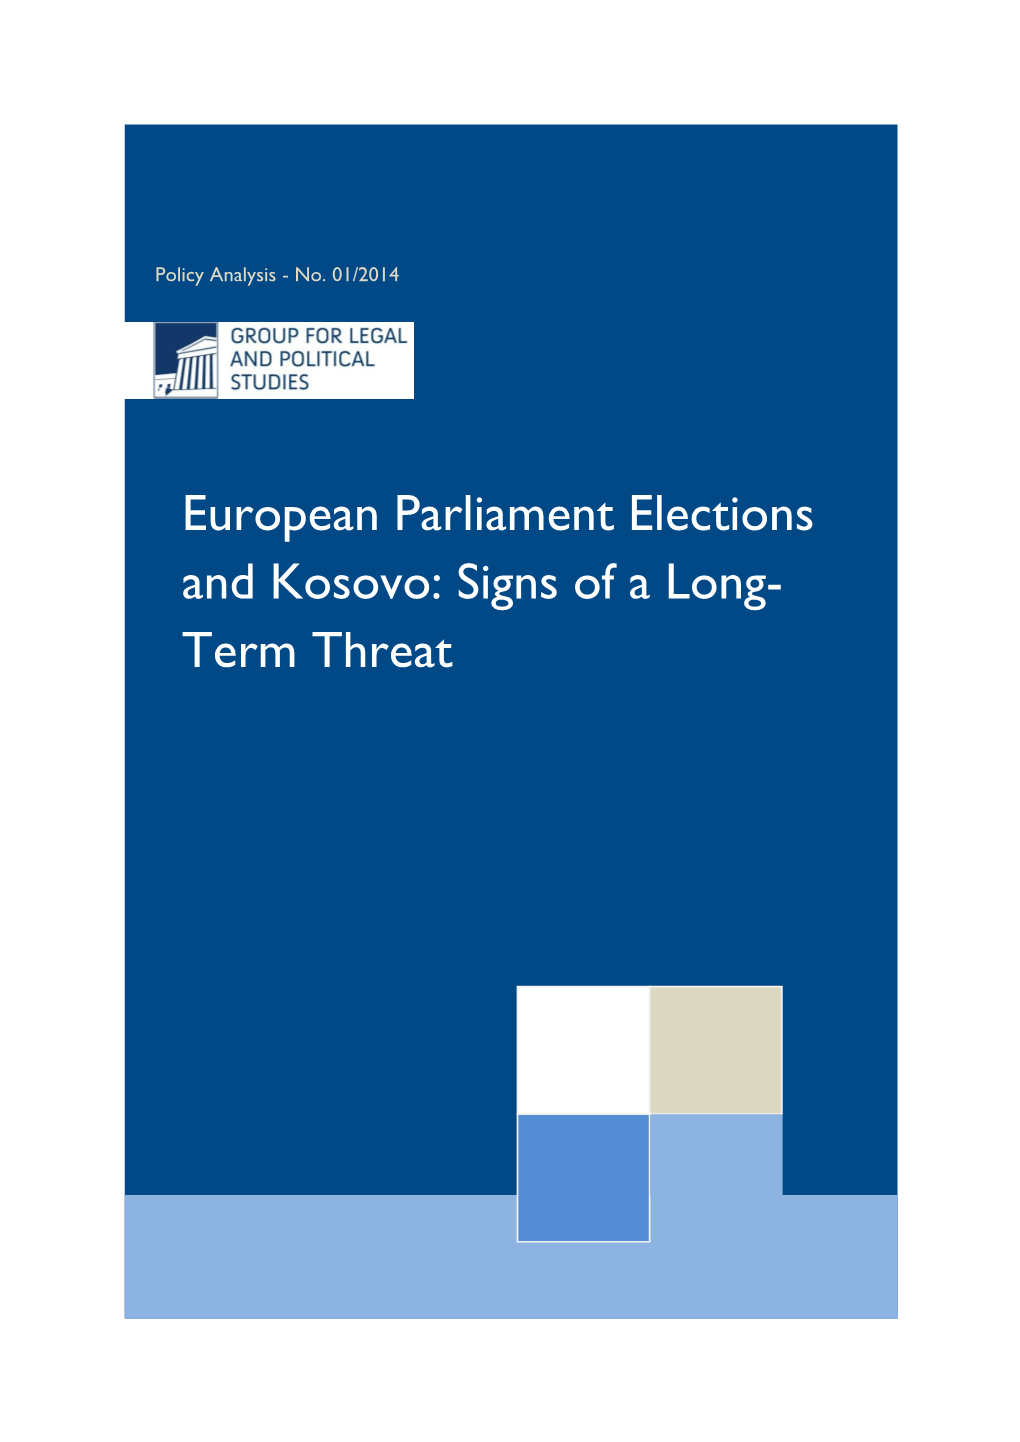 European Parliament Elections and Kosovo: Signs of a Long